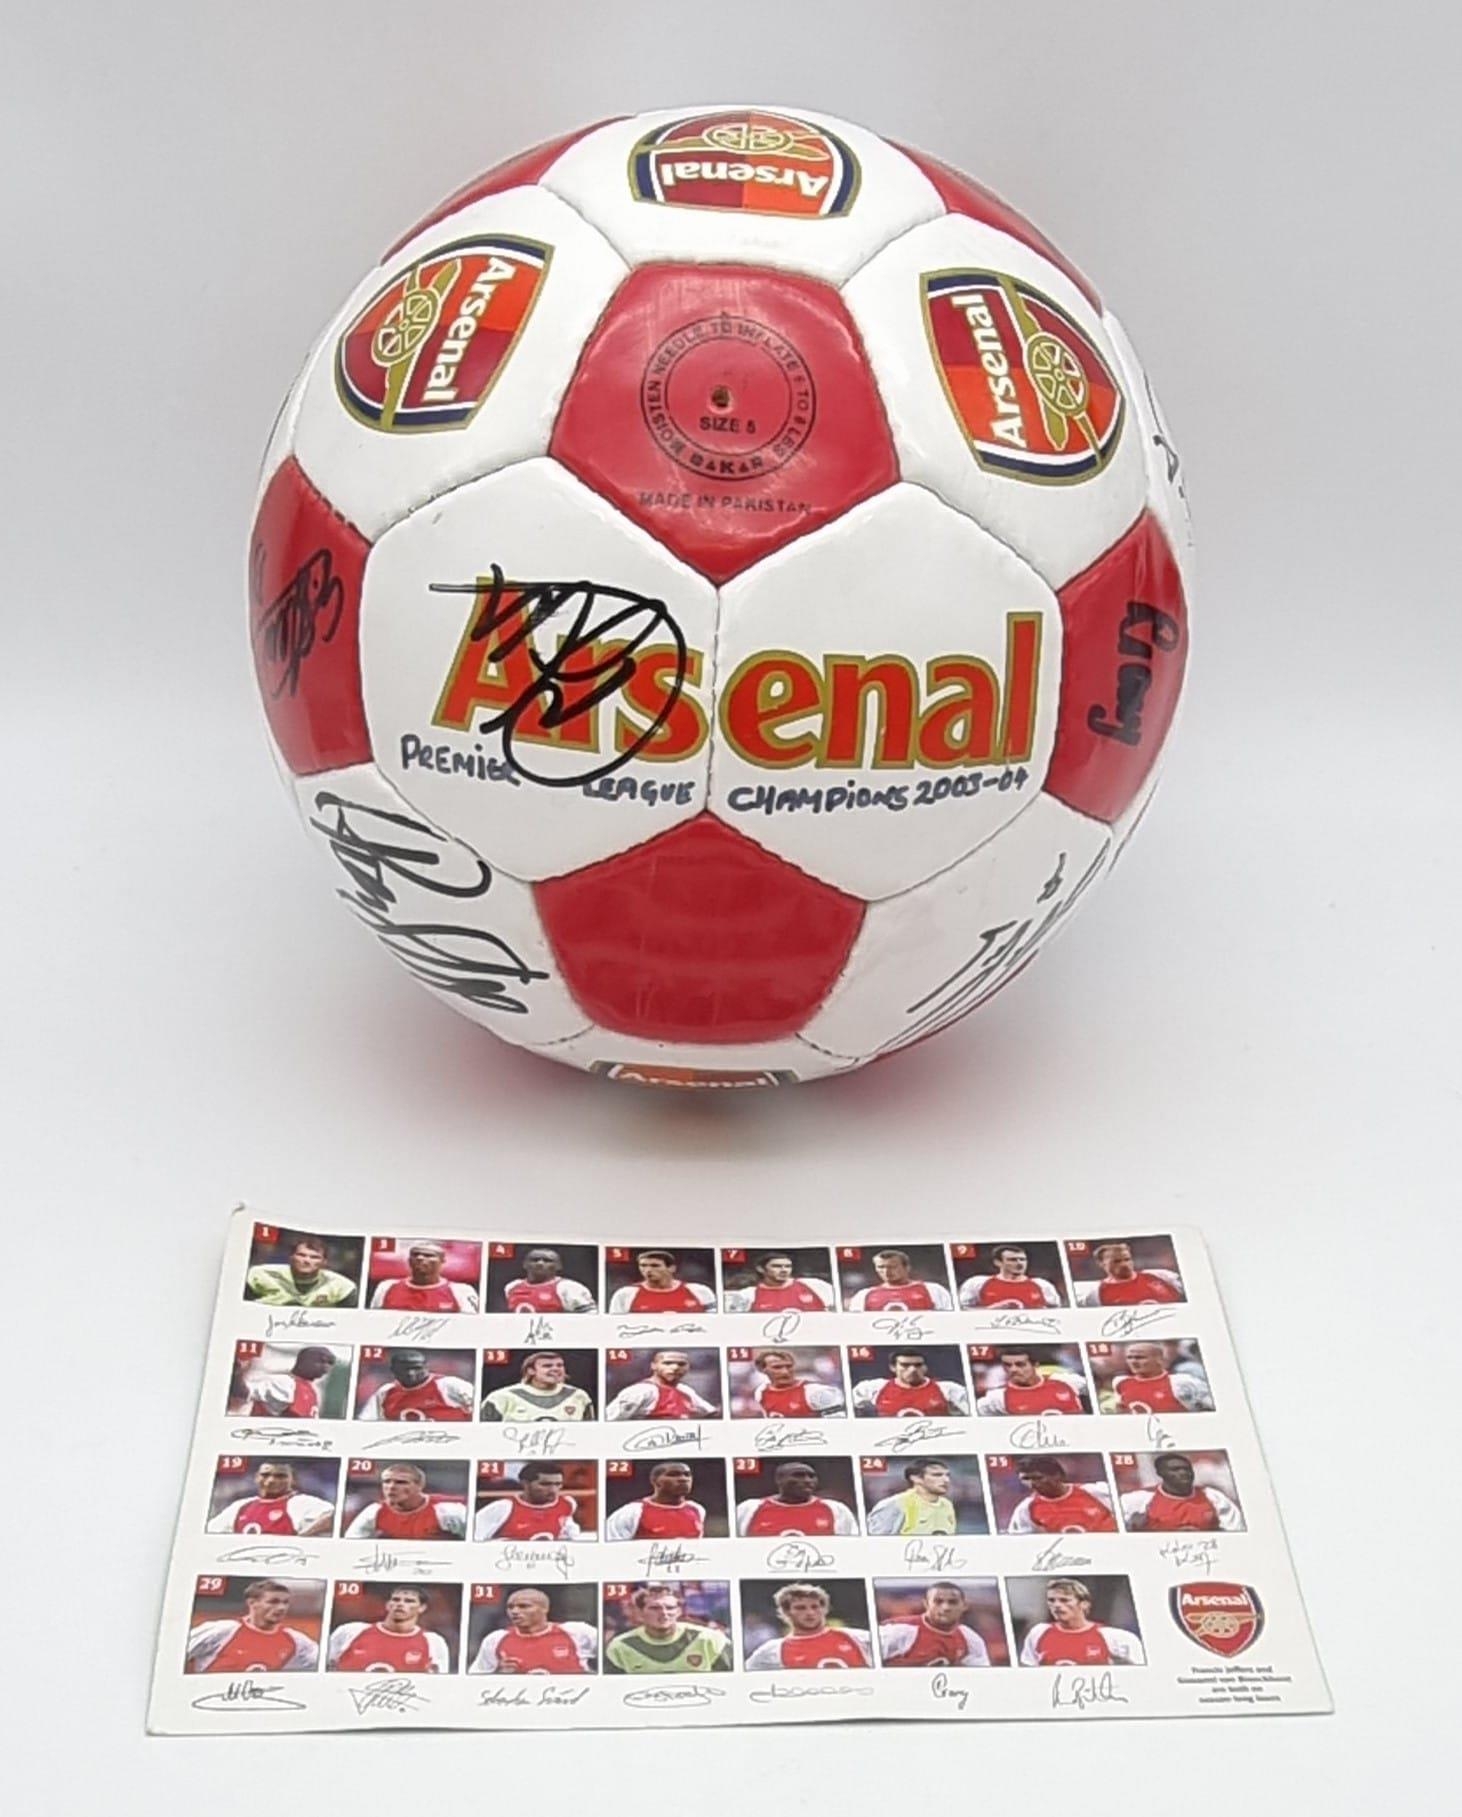 An Incredible Authentic Arsenal FC Invincibles Signed Premier League Winners Football - 2003/4